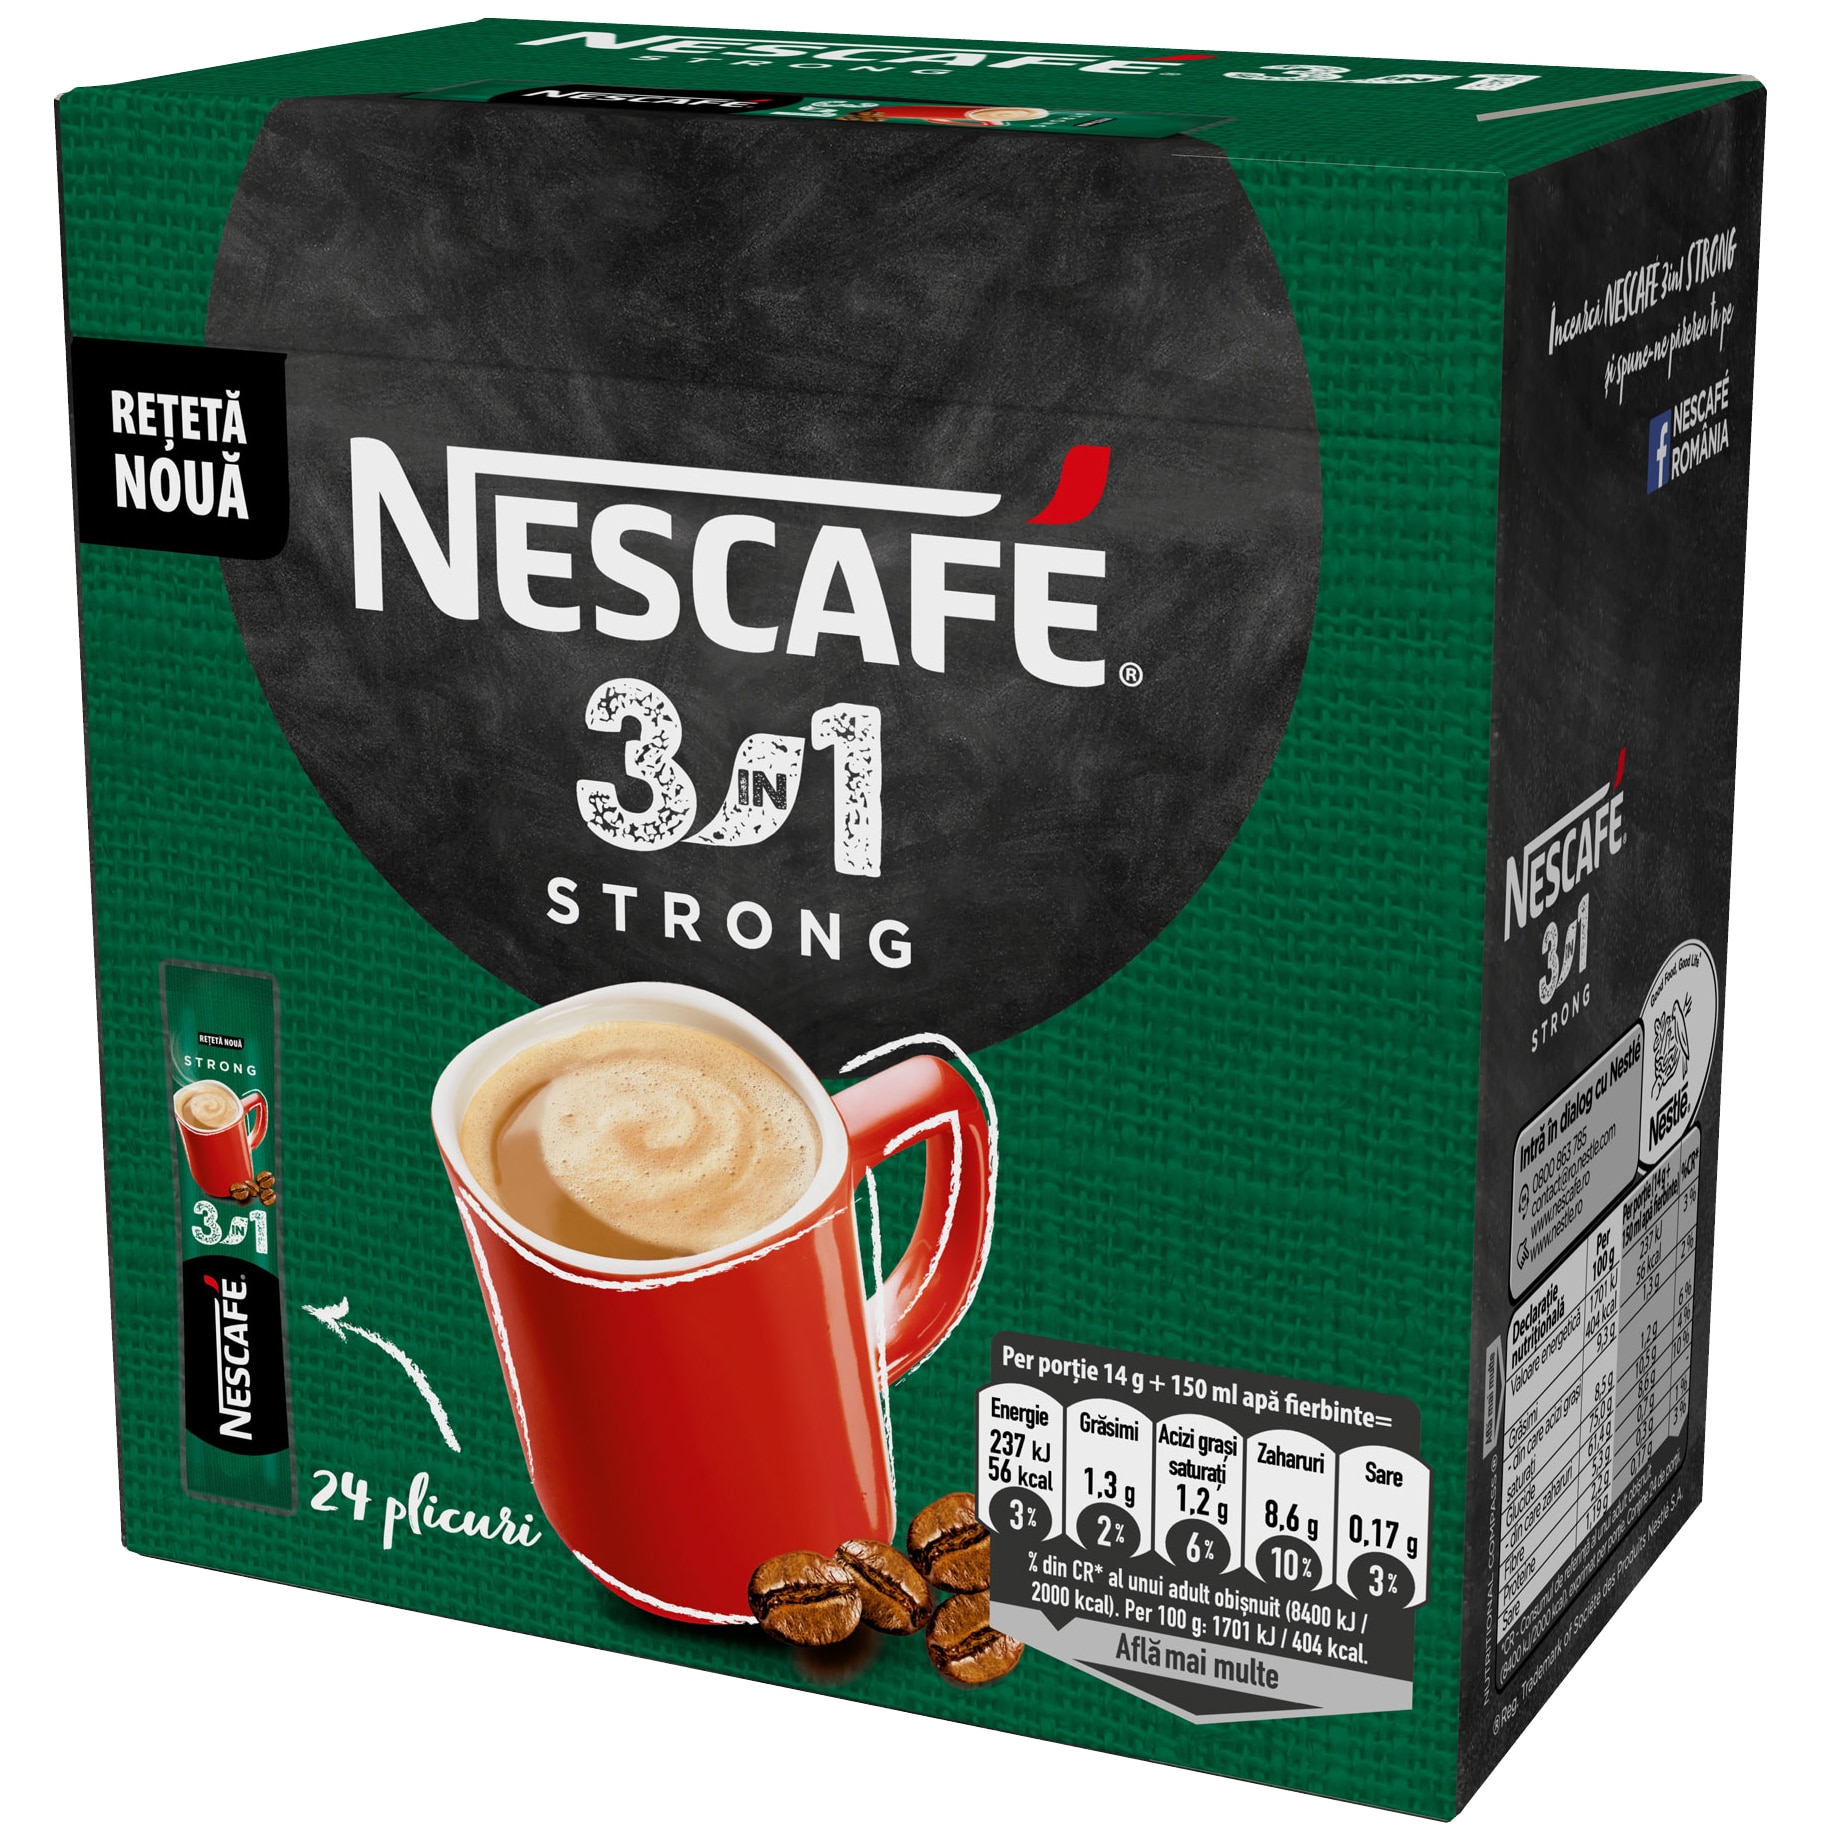 Bauturi: Cafea instant 3 in 1 Strong, Nescafe